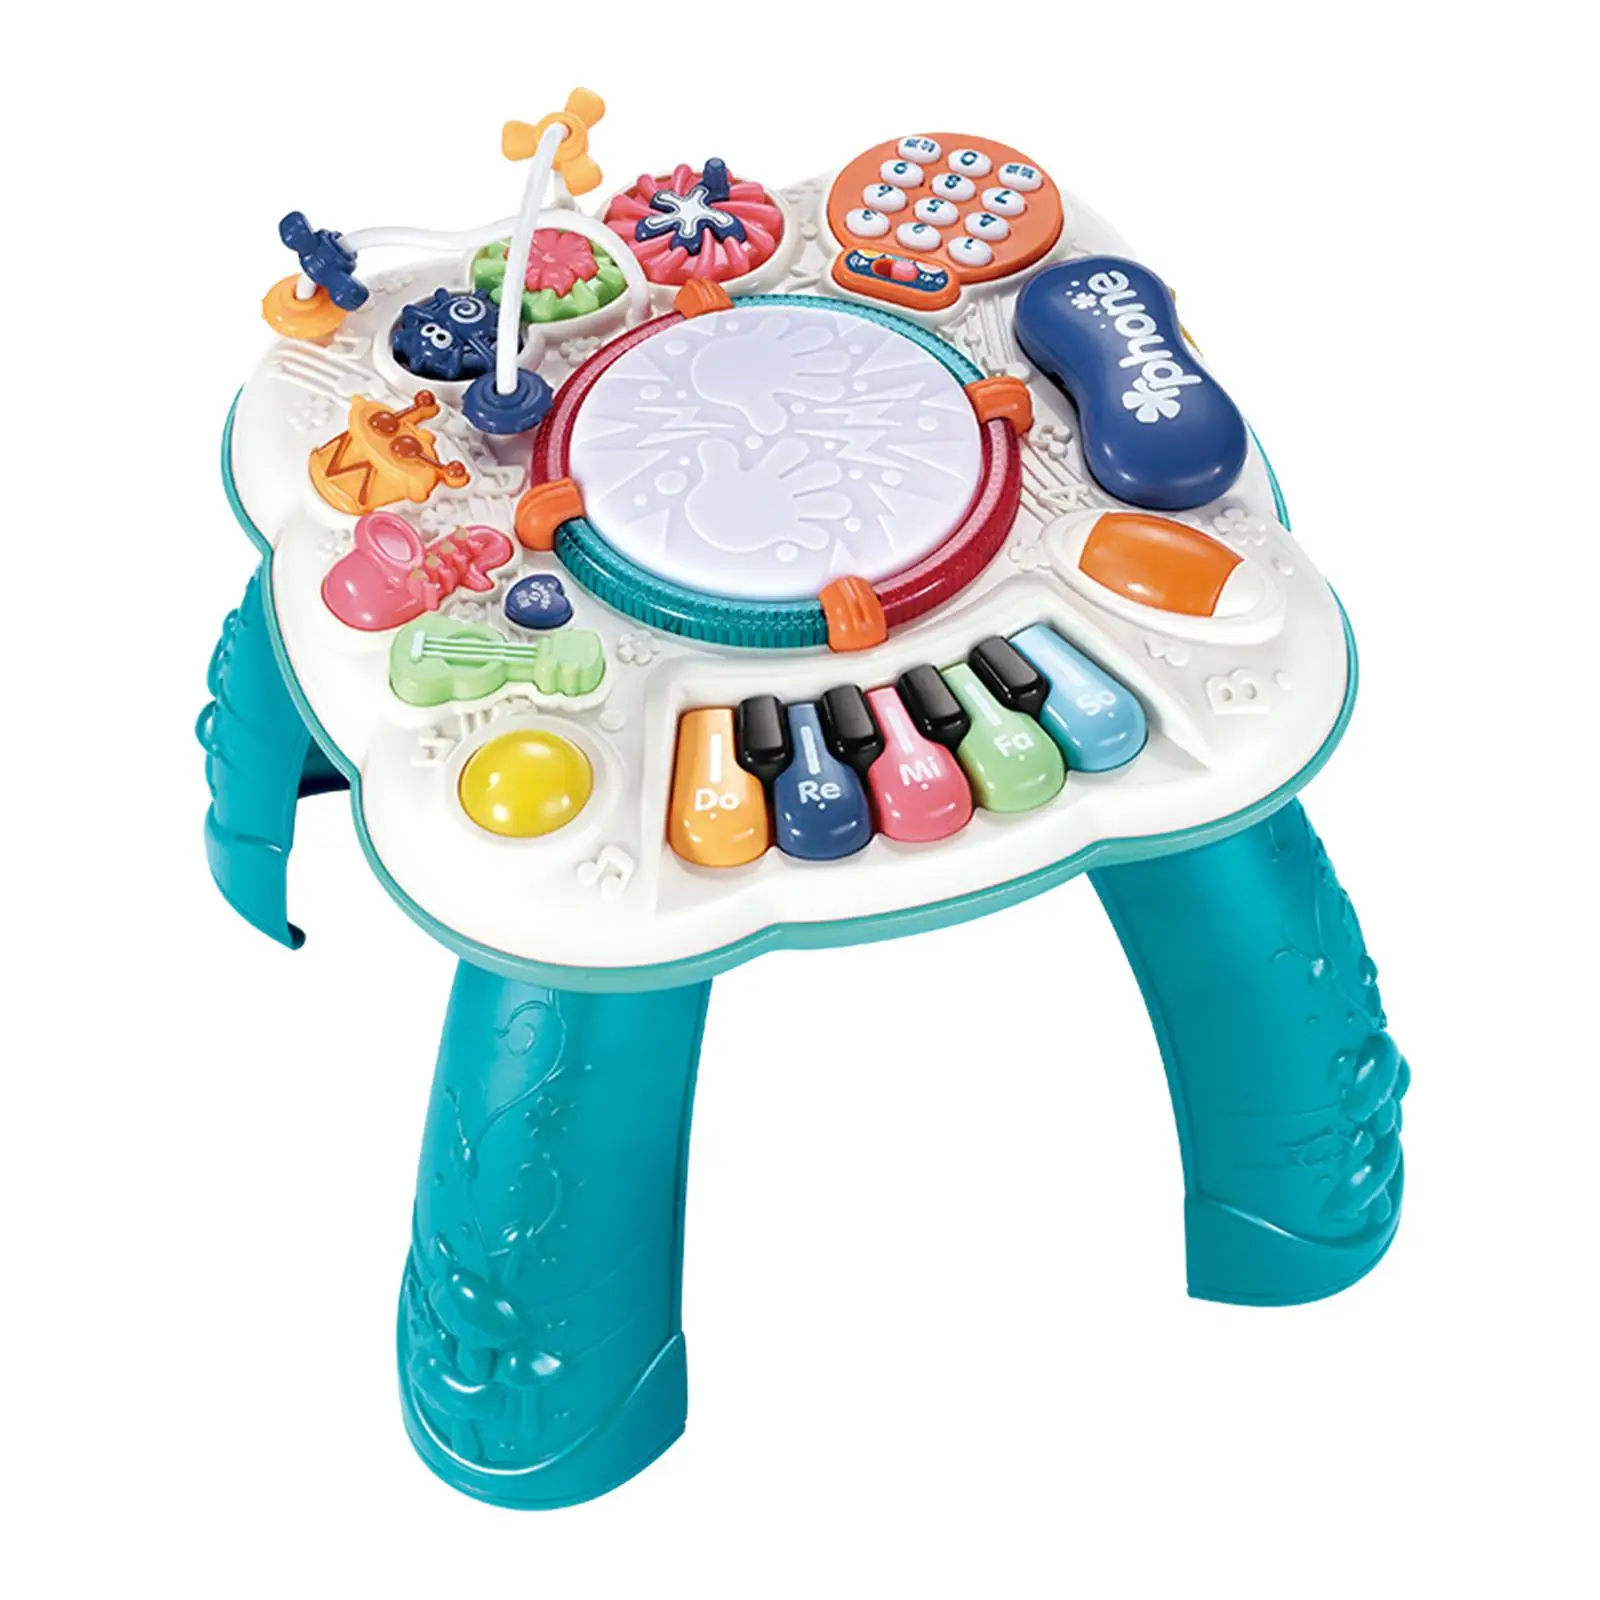 Multifunctional Children Led Art Painting Table Learning Toy New